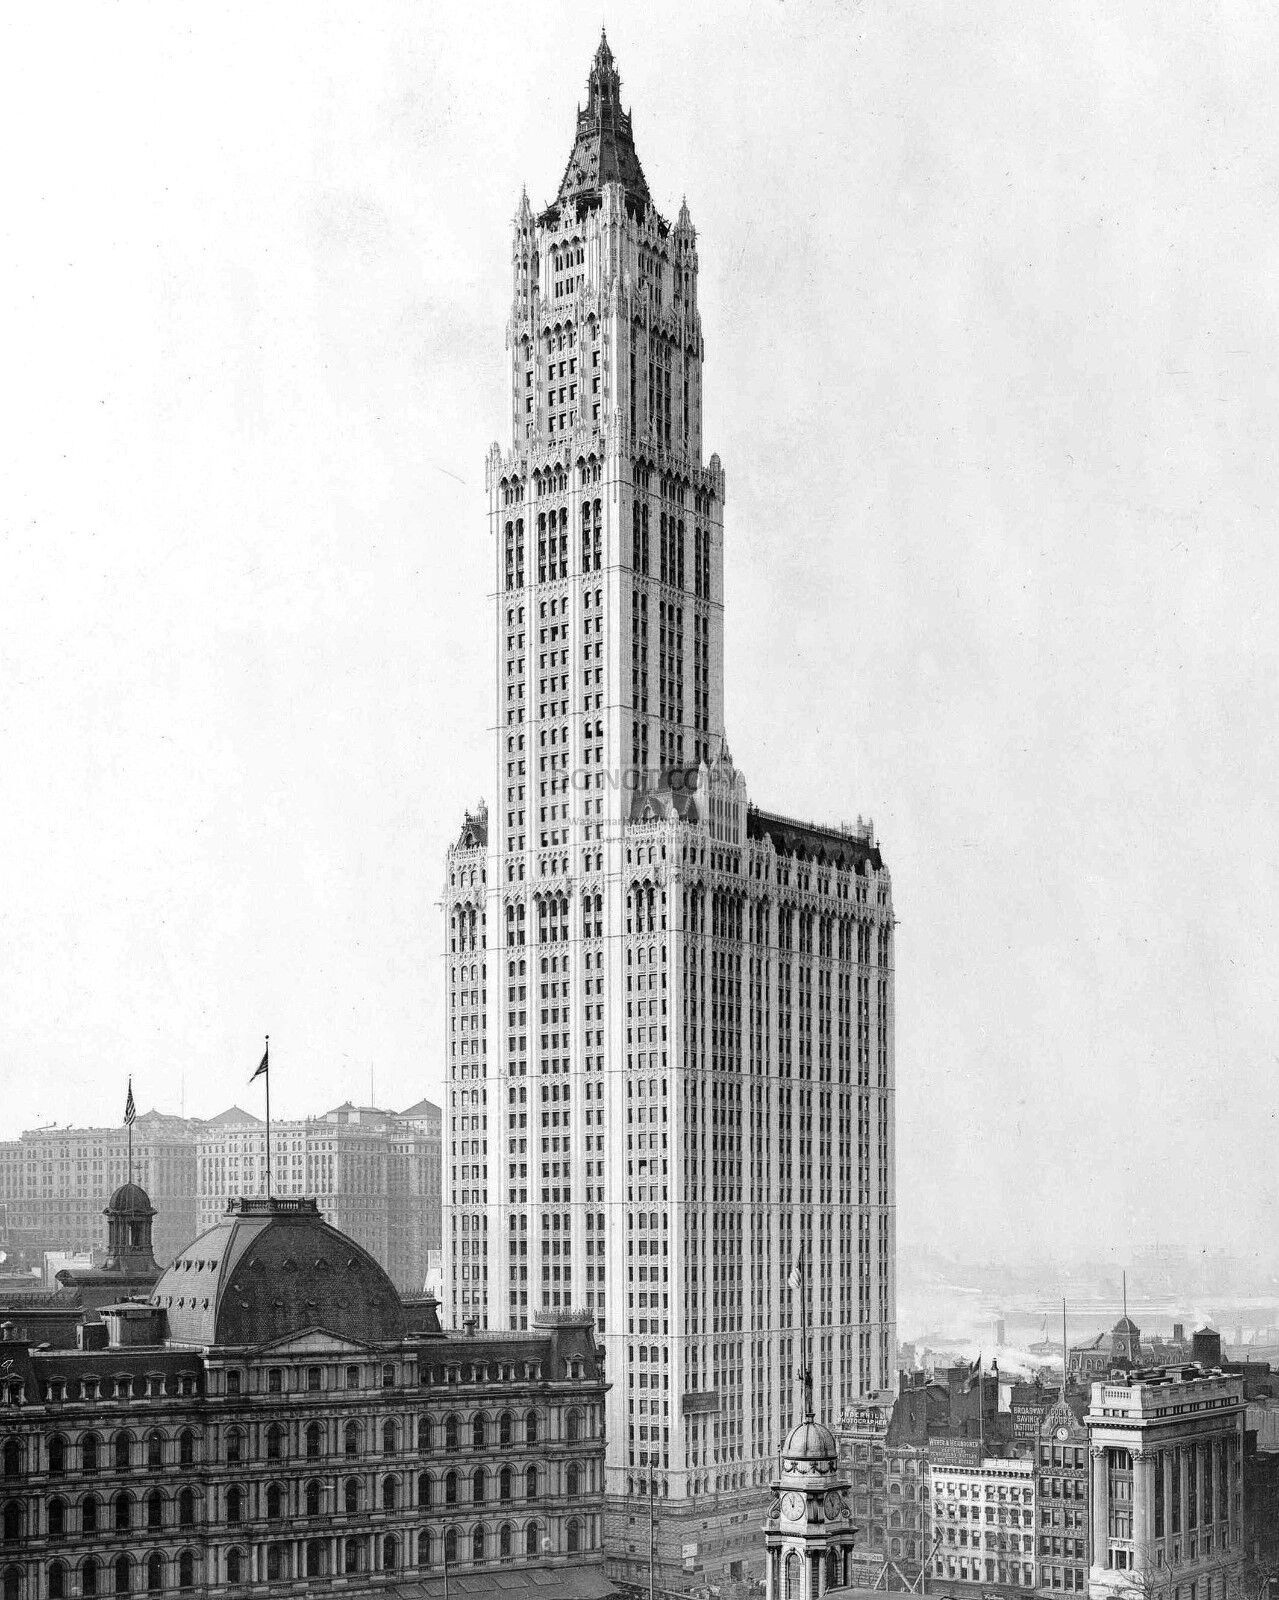 THE WOOLWORTH BUILDING IN NEW YORK CITY, CIRCA 1913 - 8X10 PHOTO (DD-134)